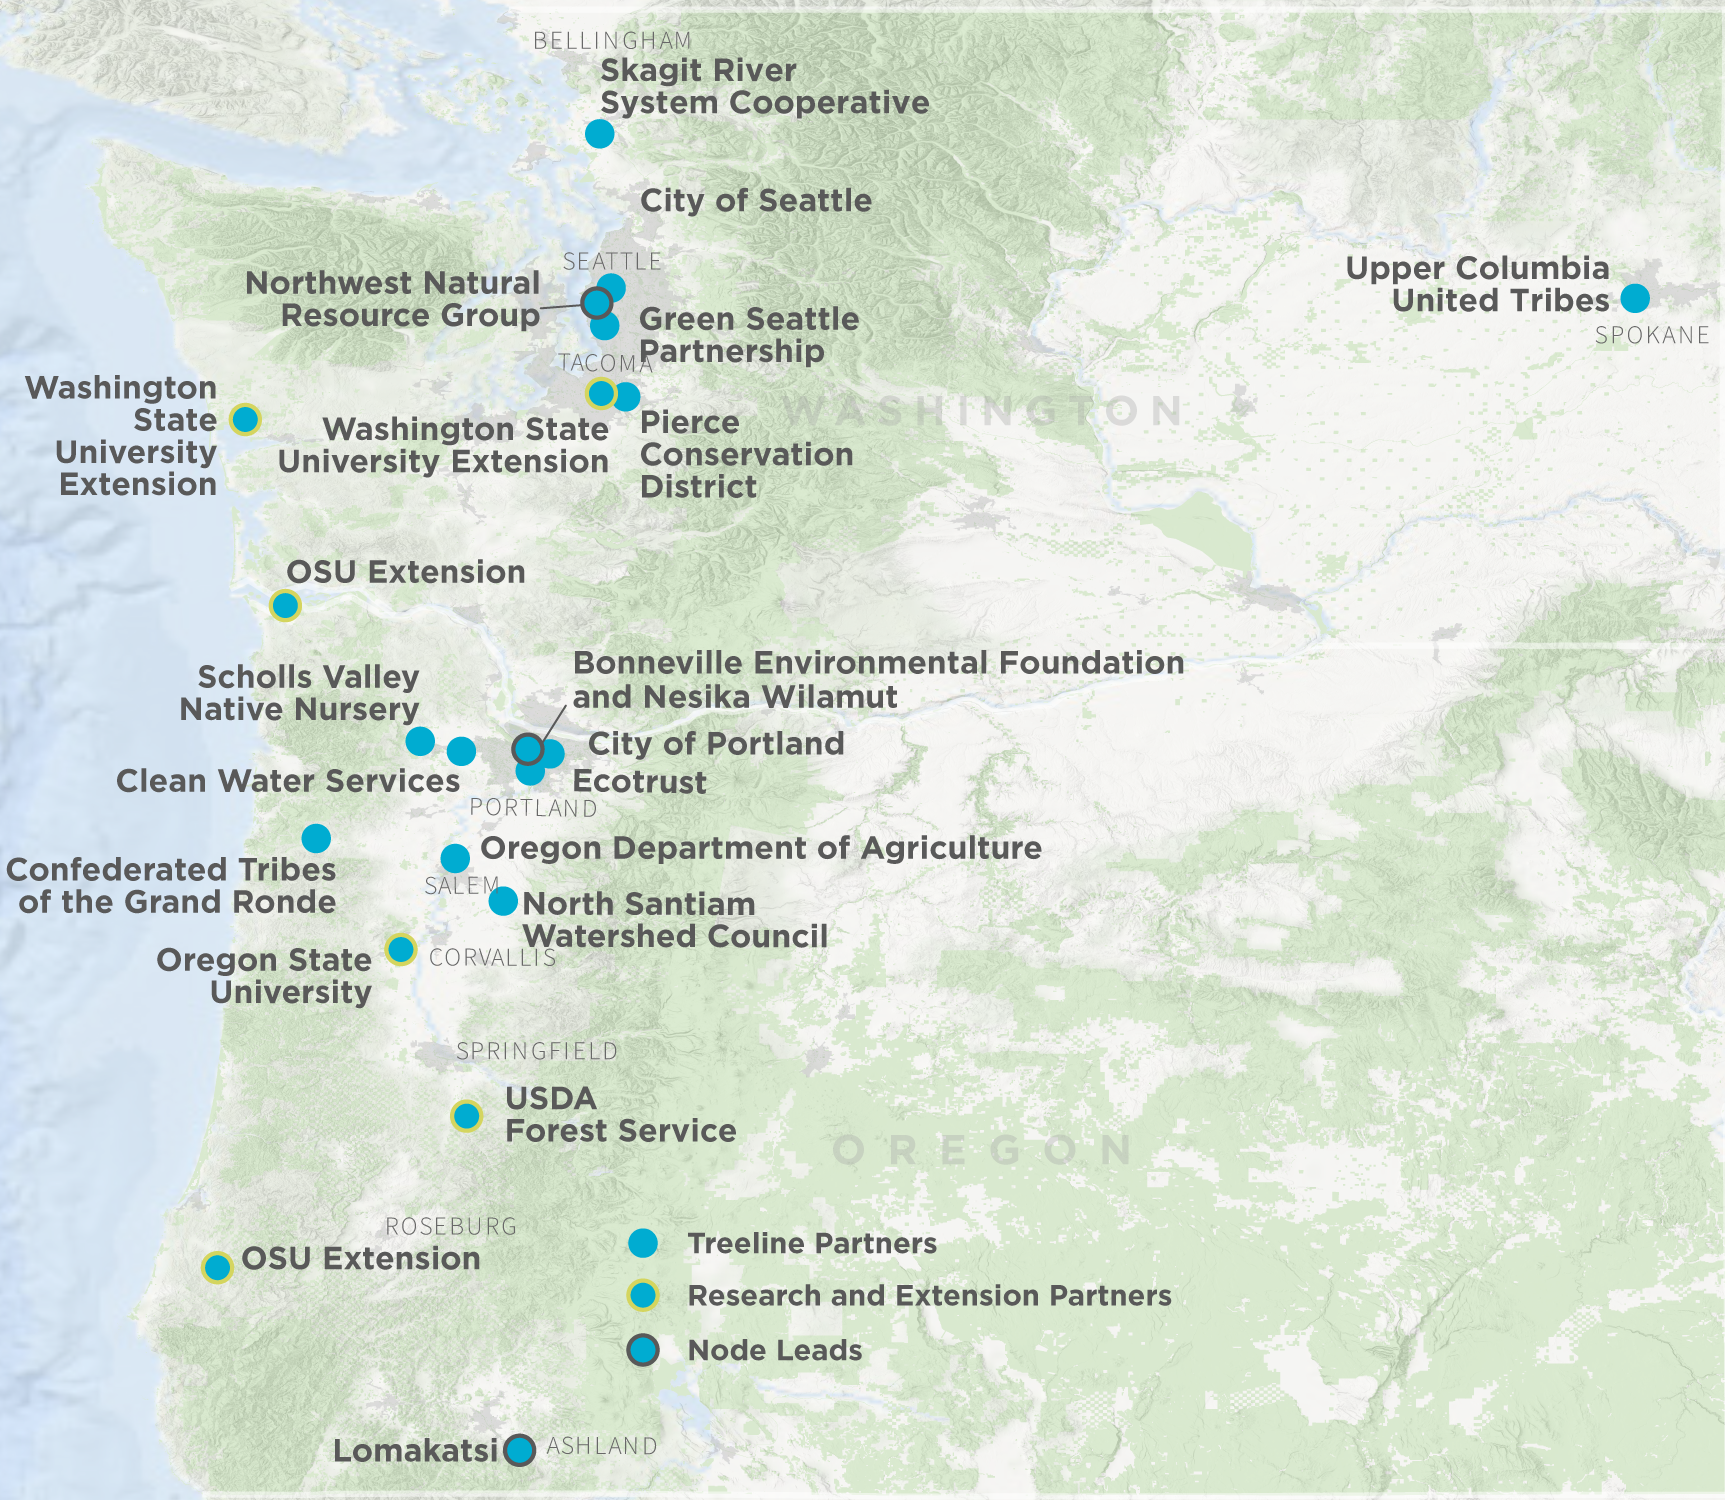 map of washington and oregon highlighting treeline partners, research & extension partners & node leads.